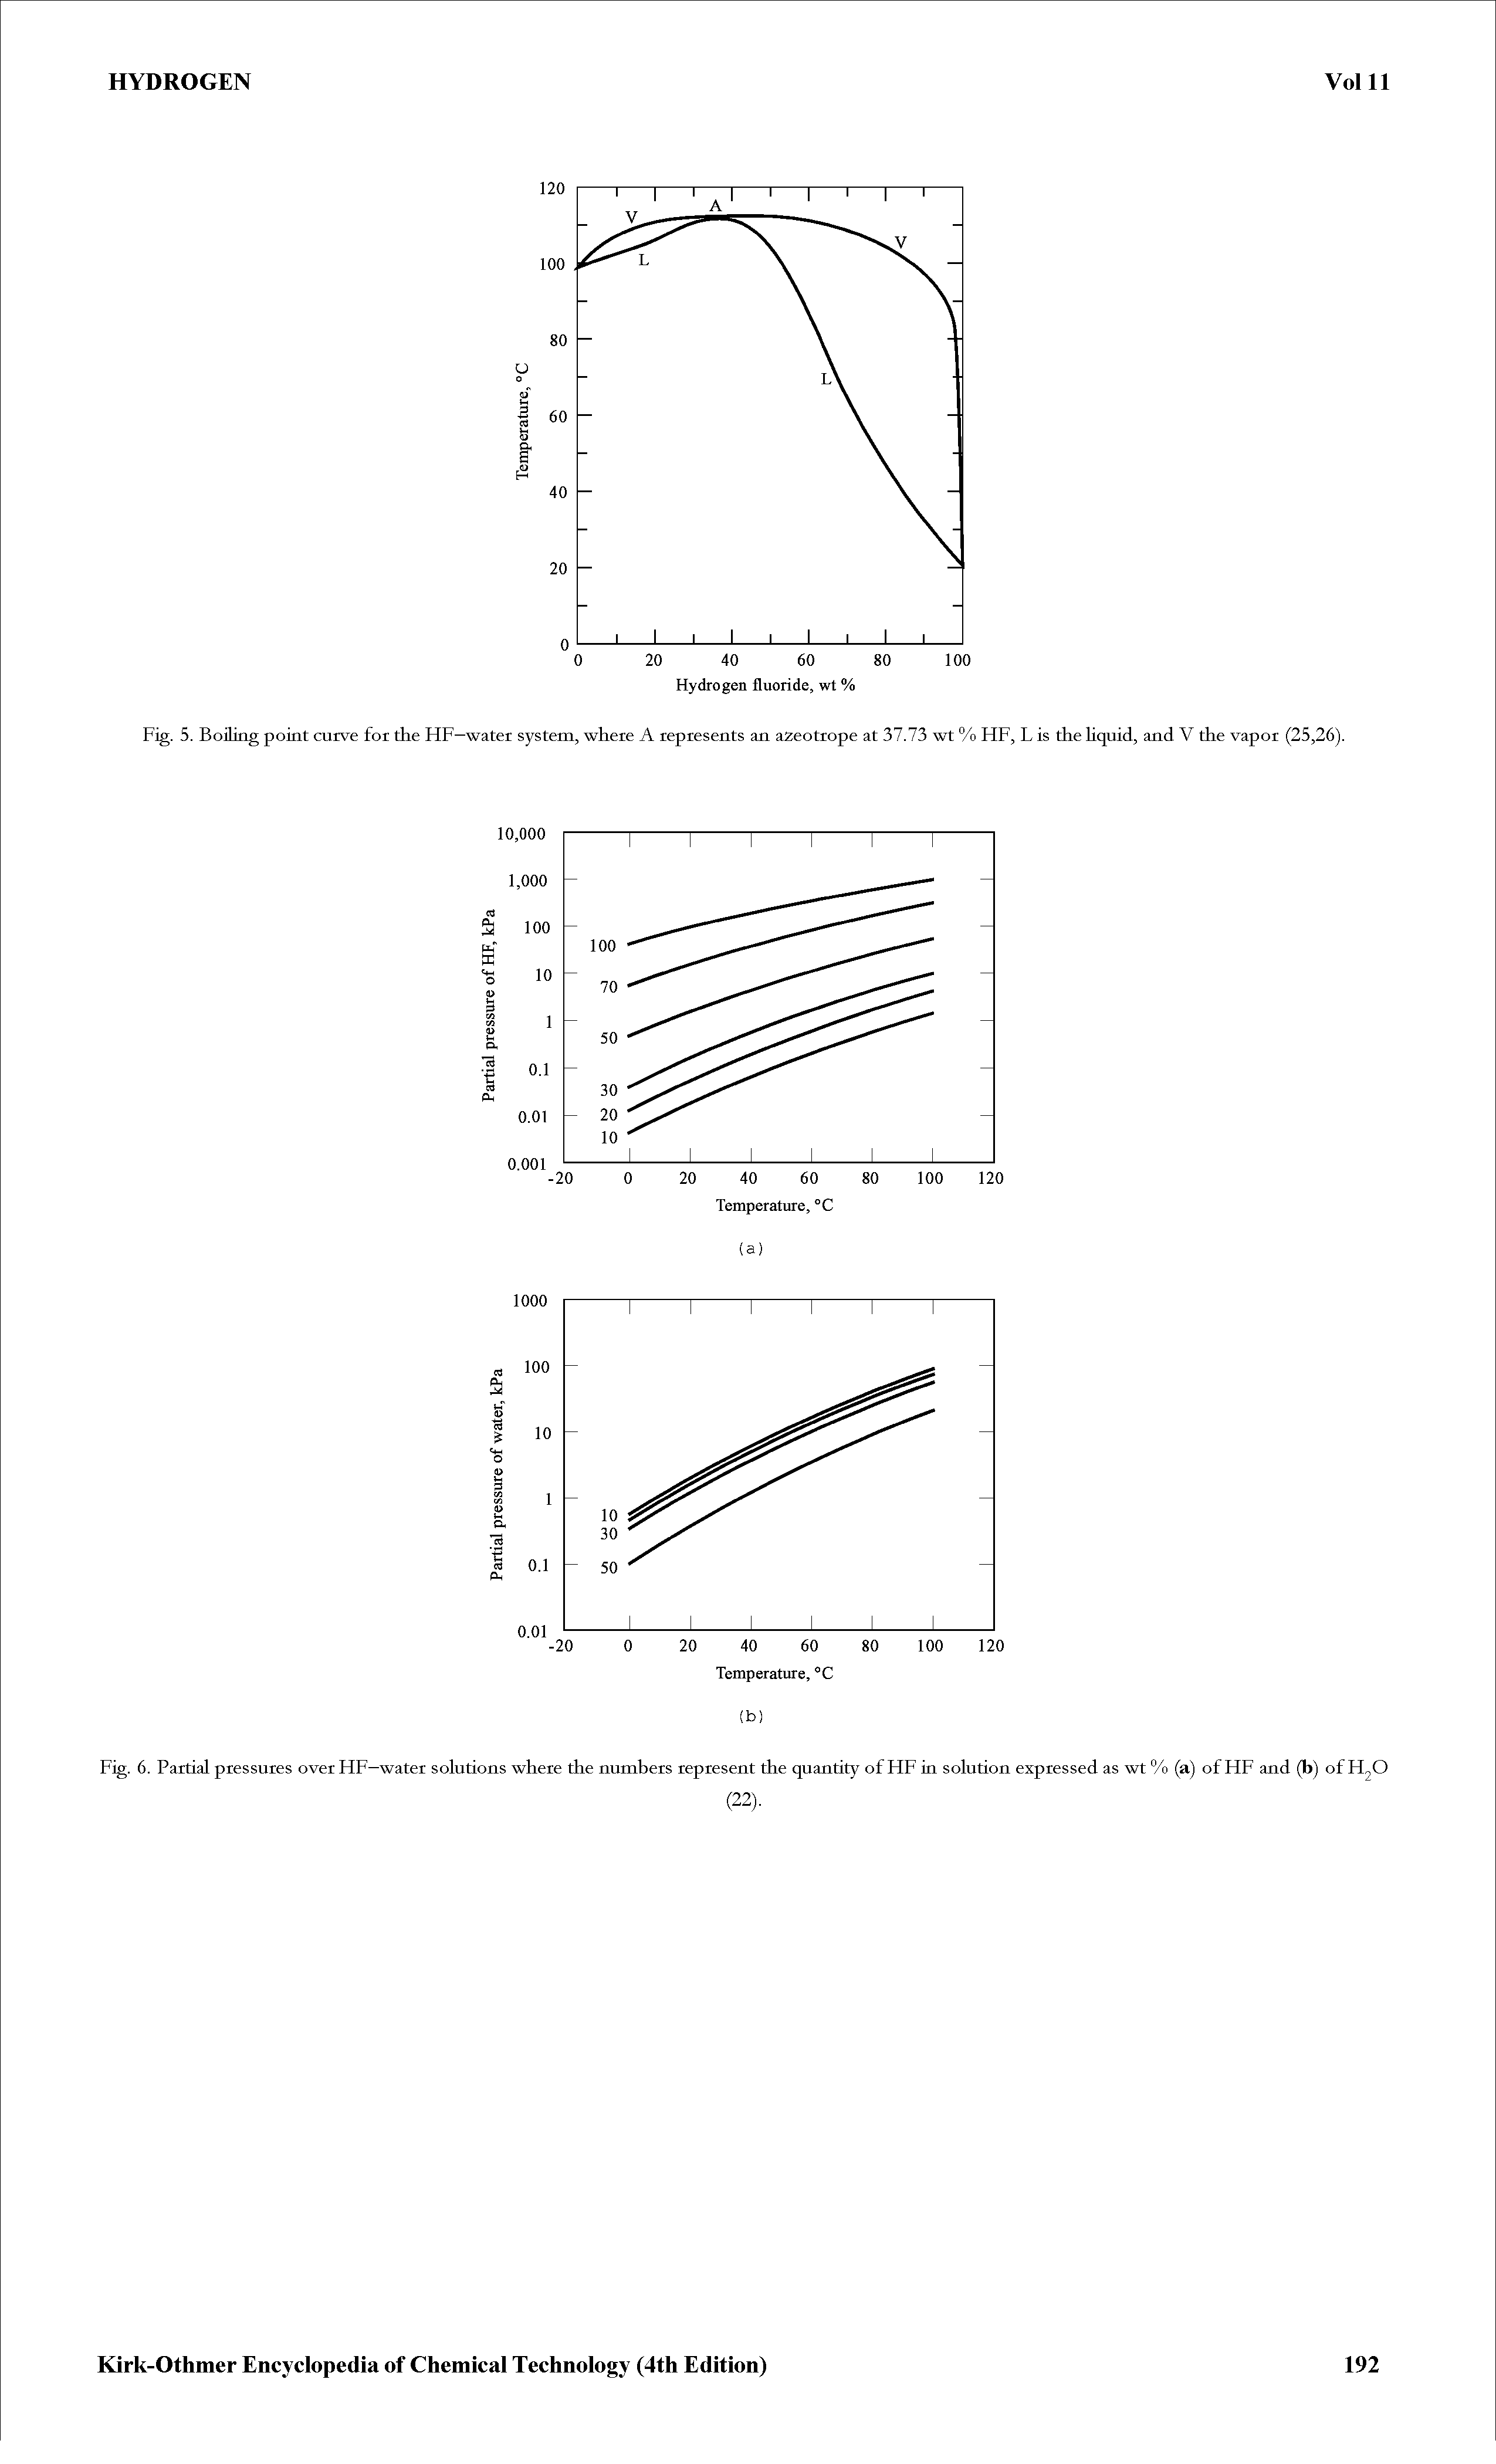 Fig. 5. Boiling point curve for the HF—water system, where A represents an a2eotrope at 37.73 wt % HF, L is the Hquid, and V the vapor (25,26).